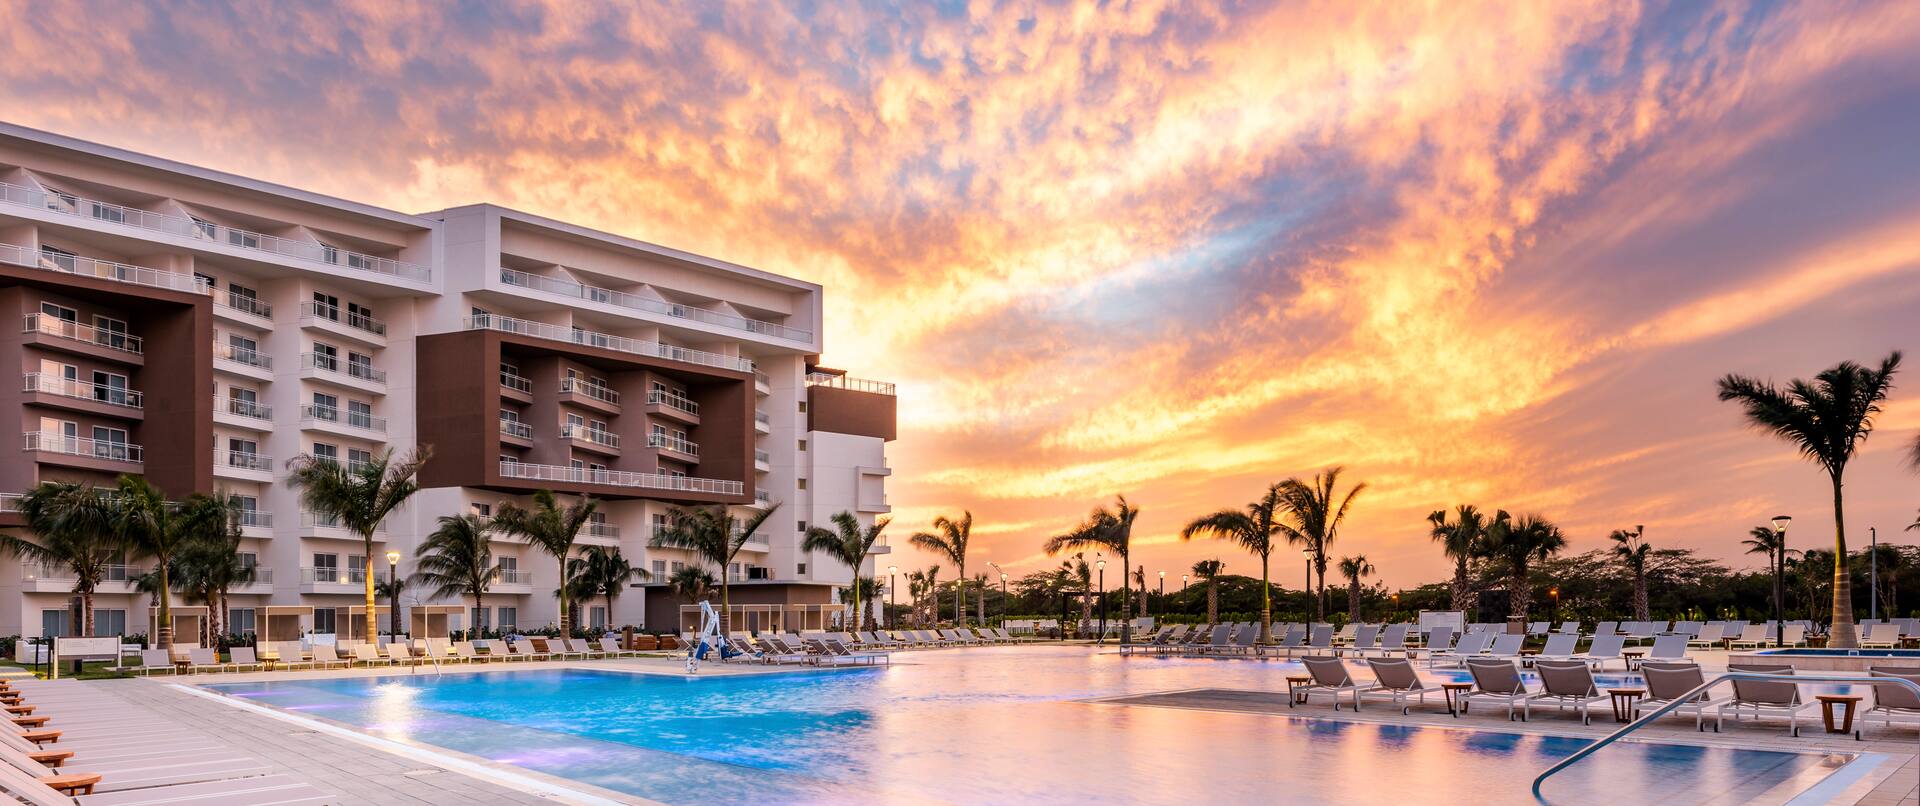 outdoor pool, hotel exterior at sunset